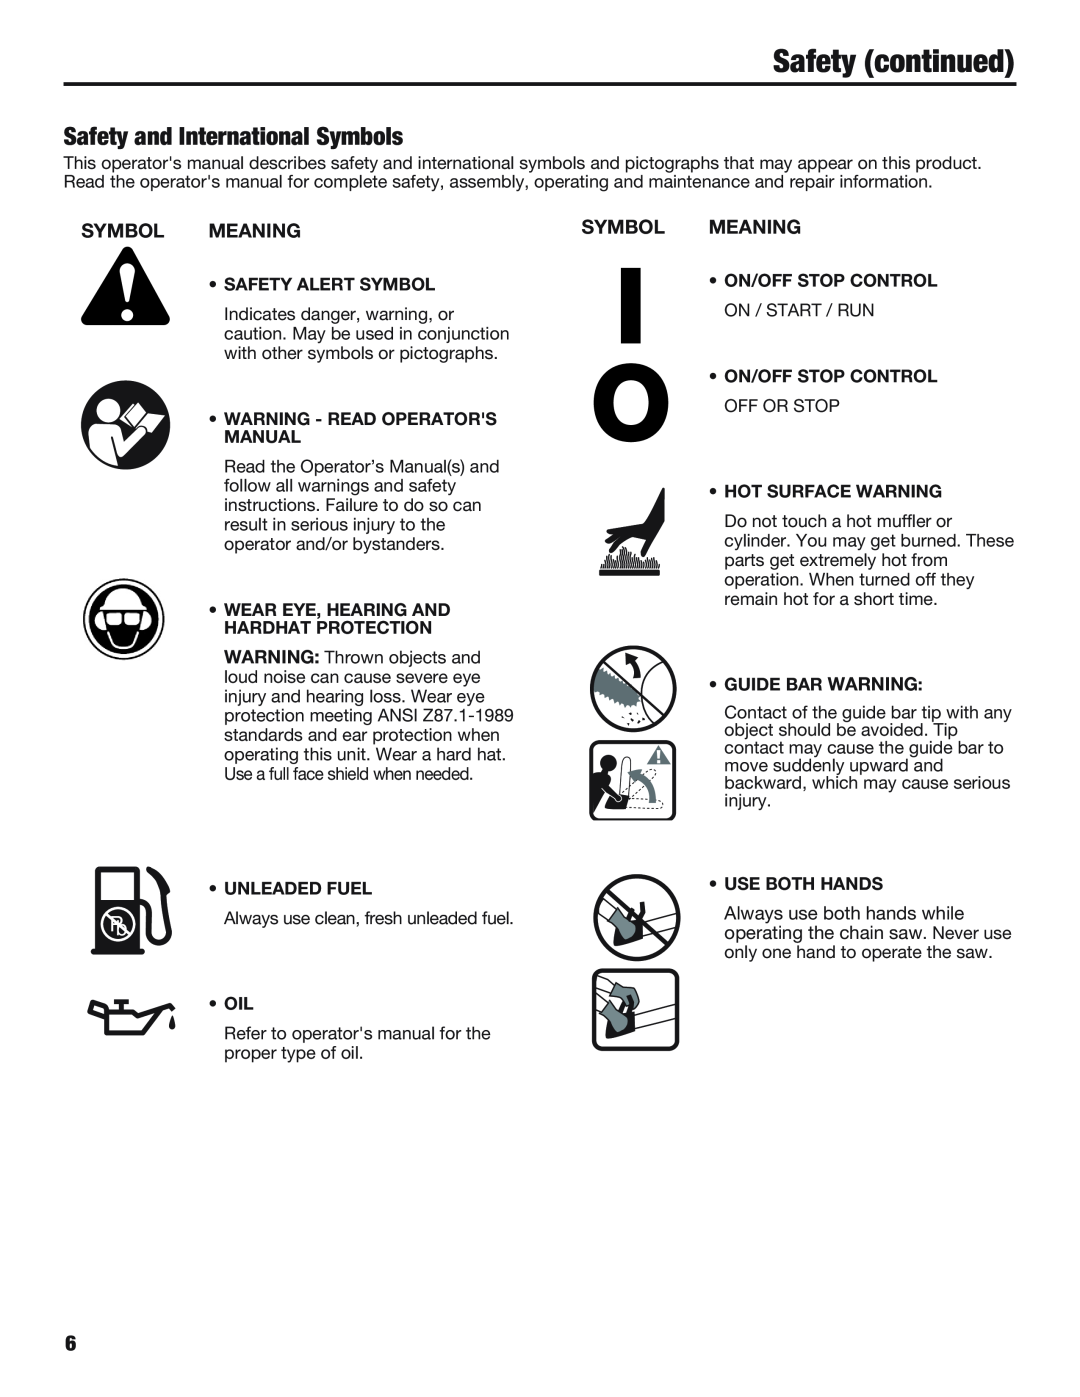 Cub Cadet CS5720 Safety and International Symbols, Meaning, Safety continued, Safety Alert Symbol, Unleaded Fuel, Oil 